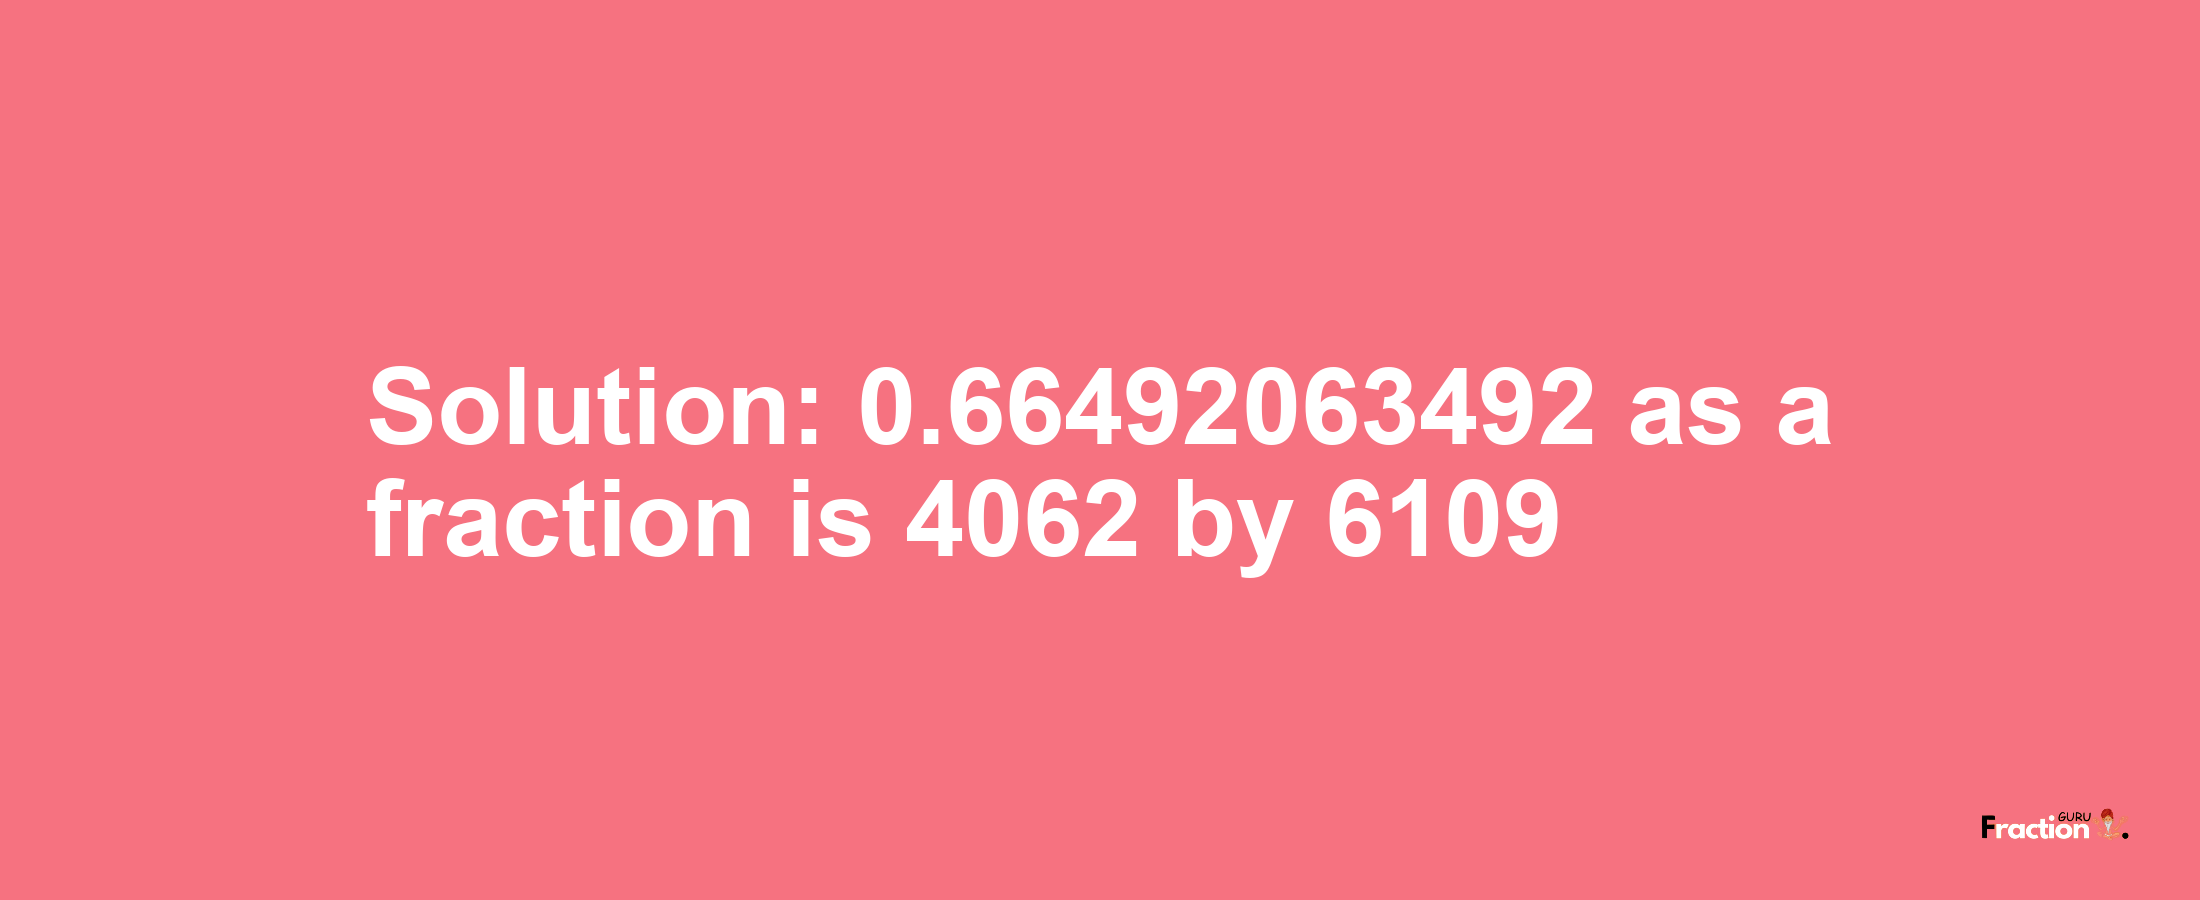 Solution:0.66492063492 as a fraction is 4062/6109